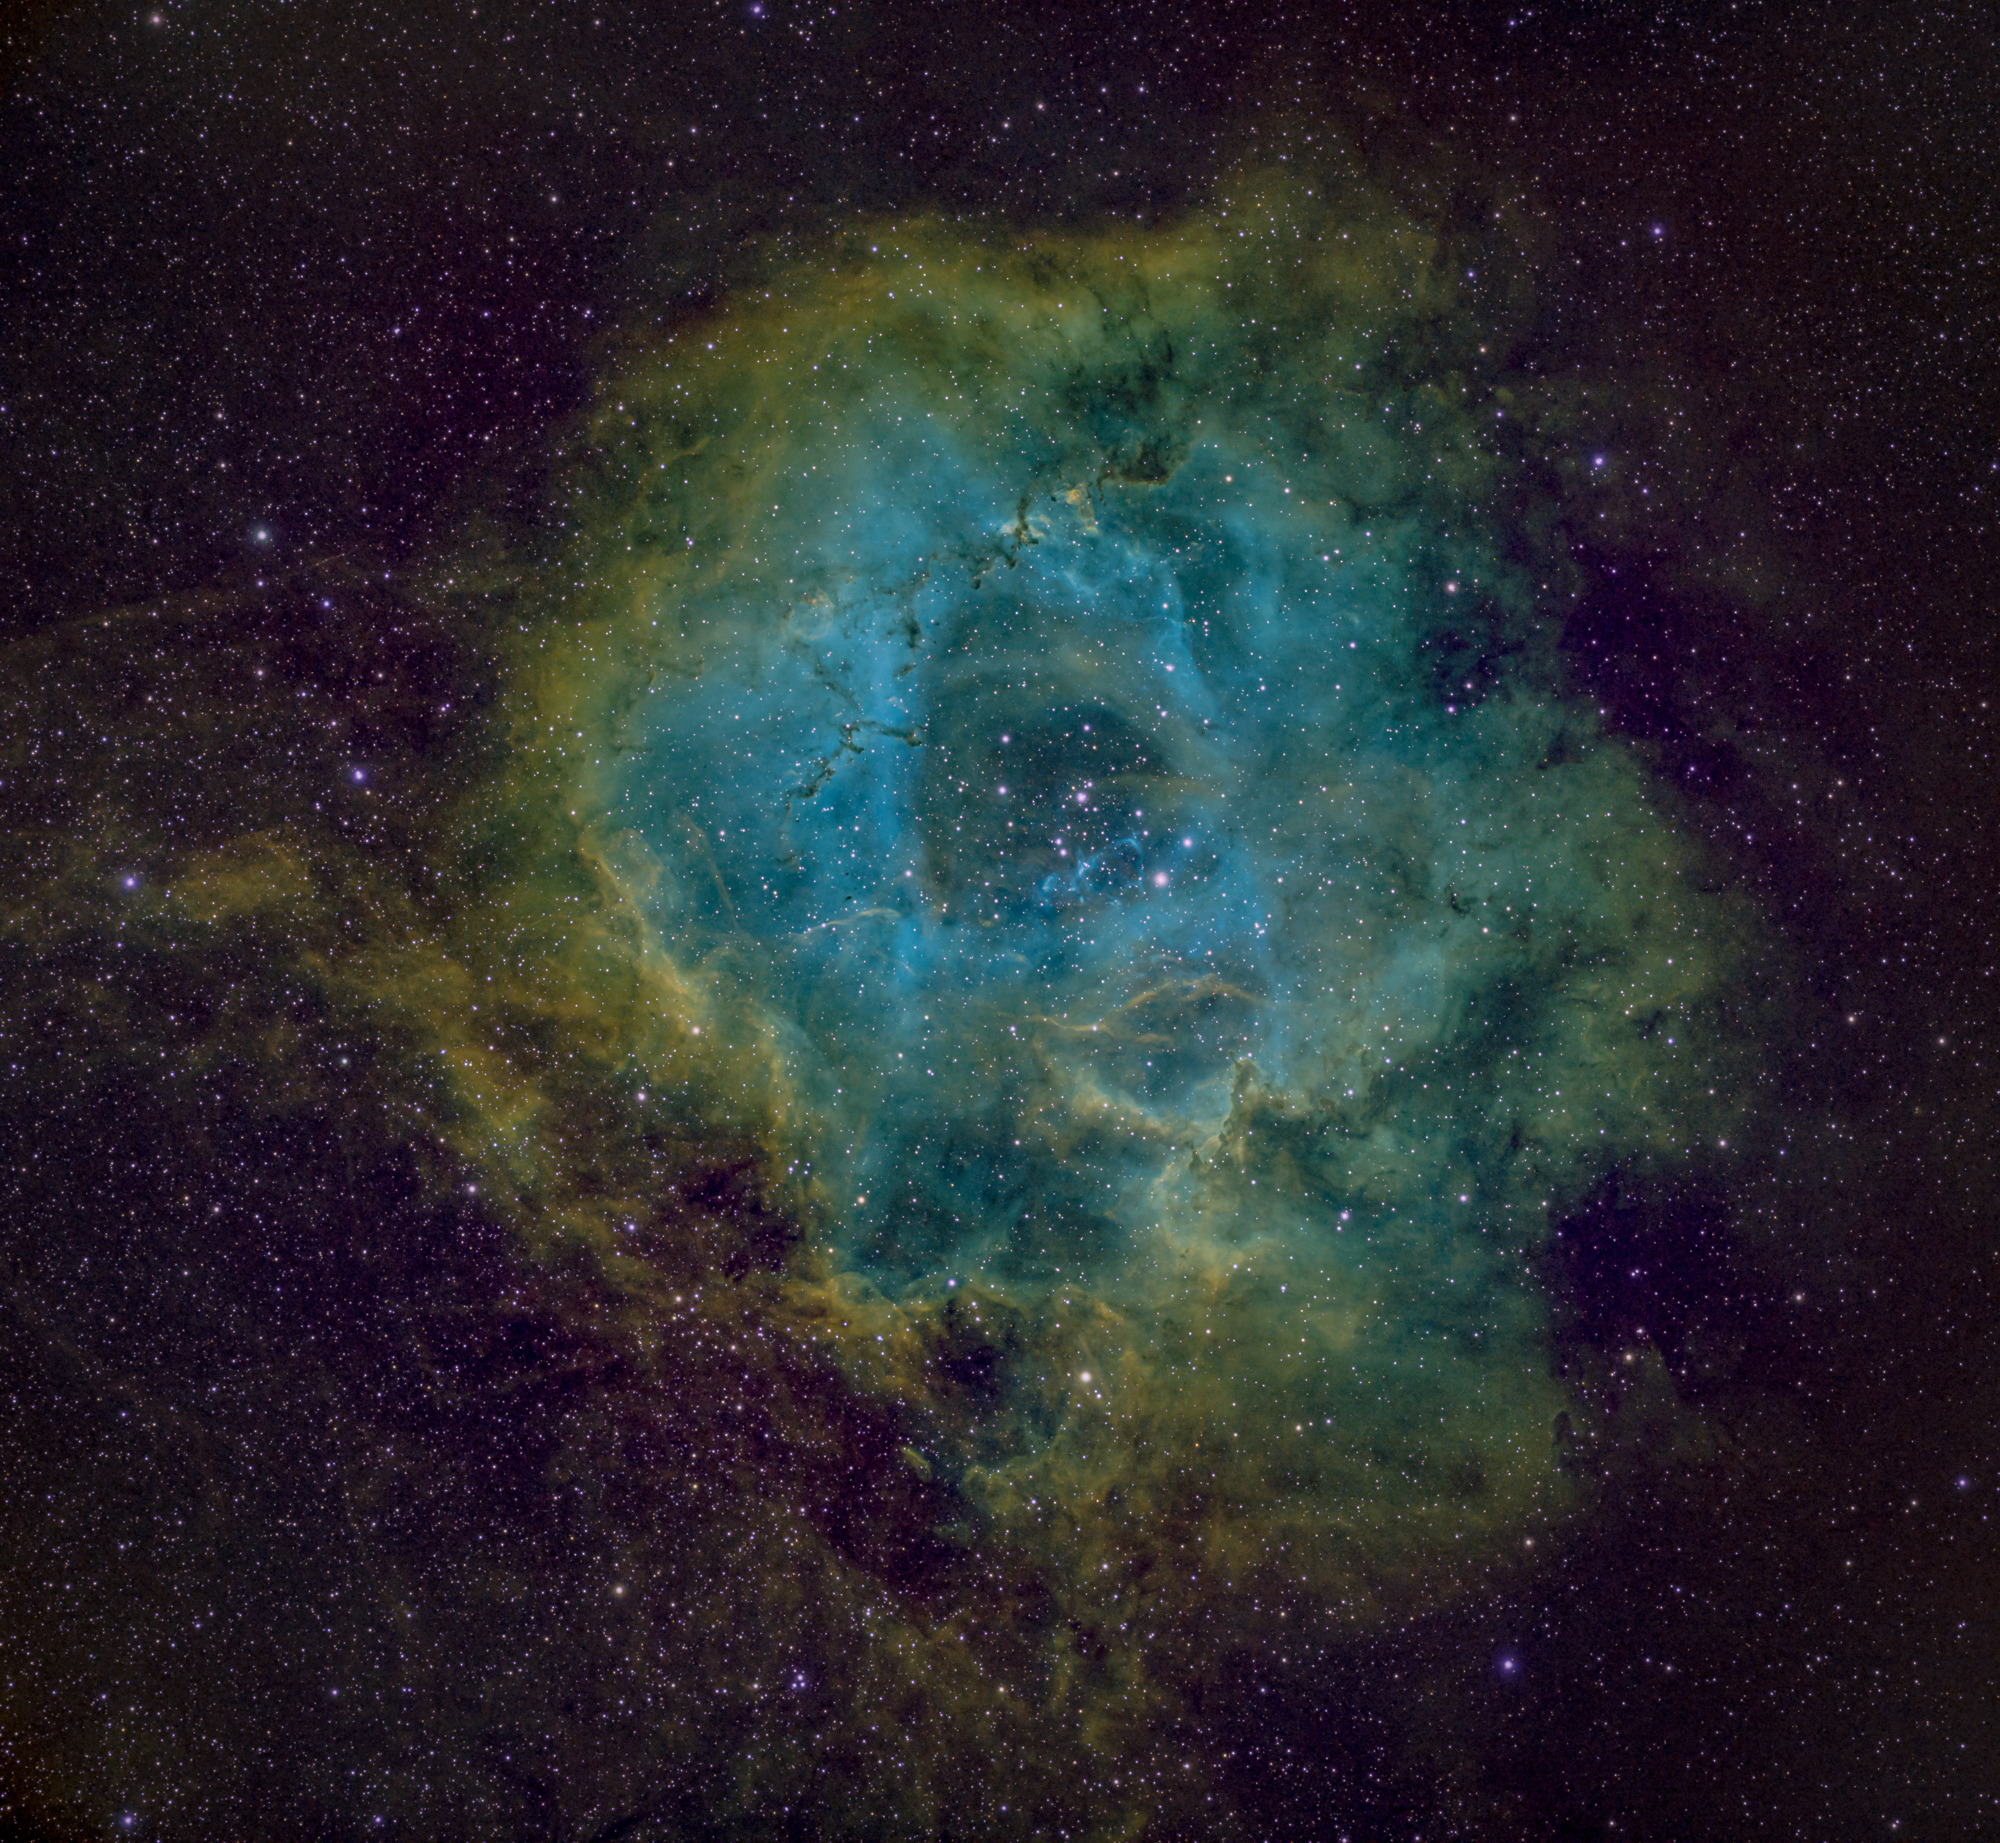 A nebula is an interstellar cloud of dust, hydrogen, helium and other ionized gases. Photo courtesy Andy Harrell